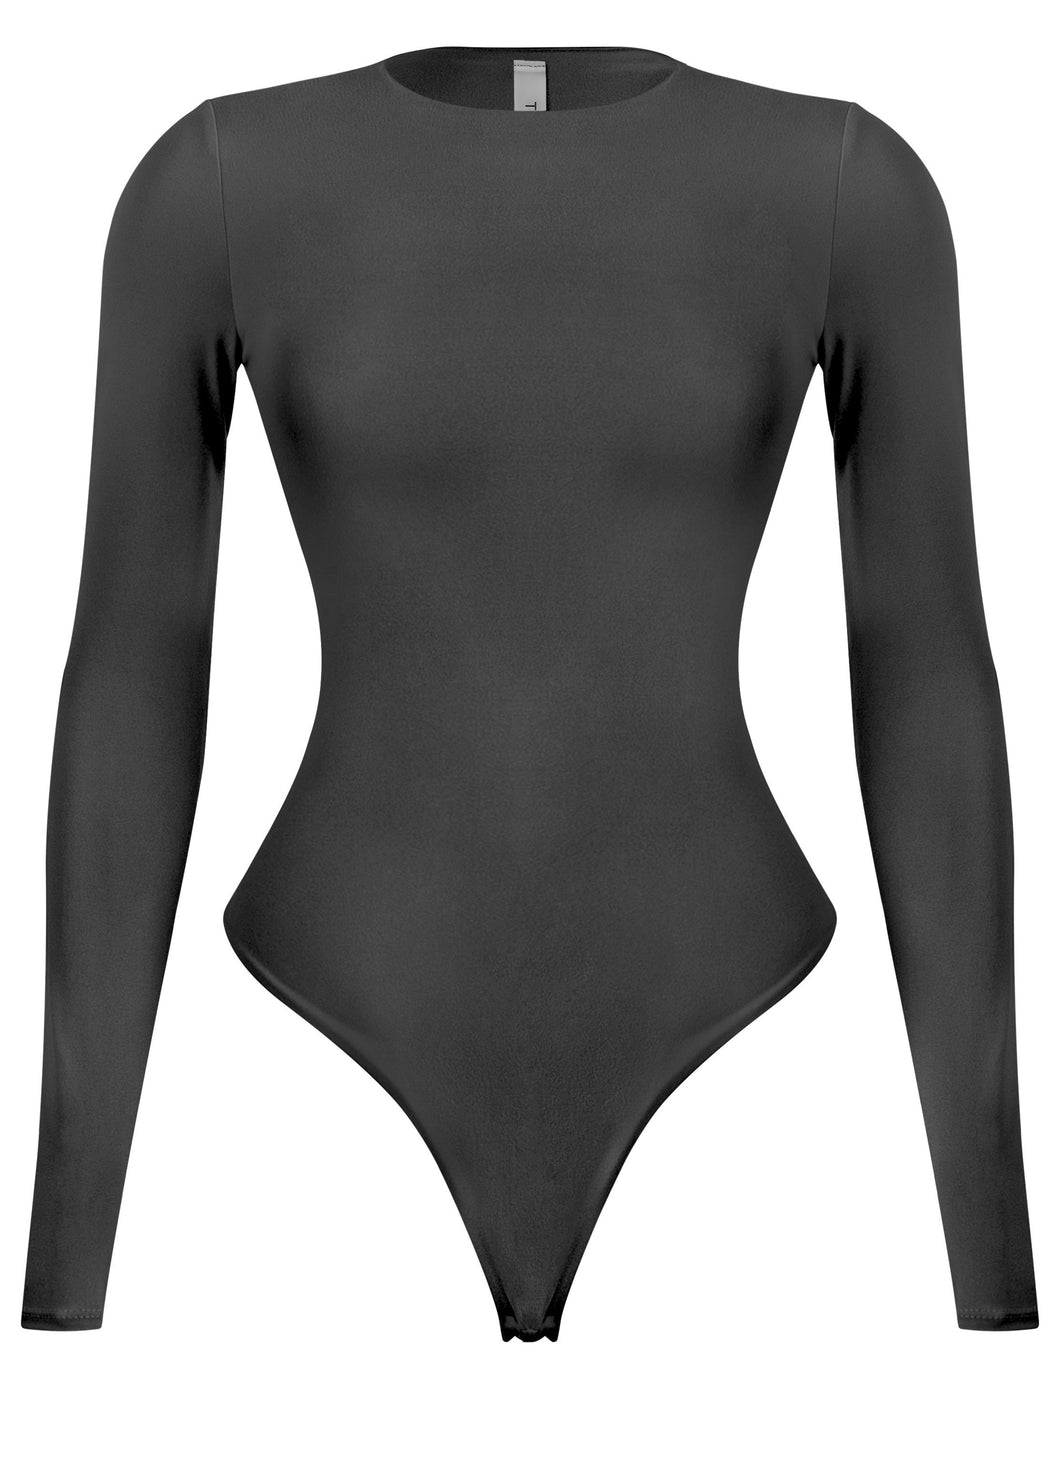 Adrianna Double Lined Long Sleeve Bodysuit (2 Colors)